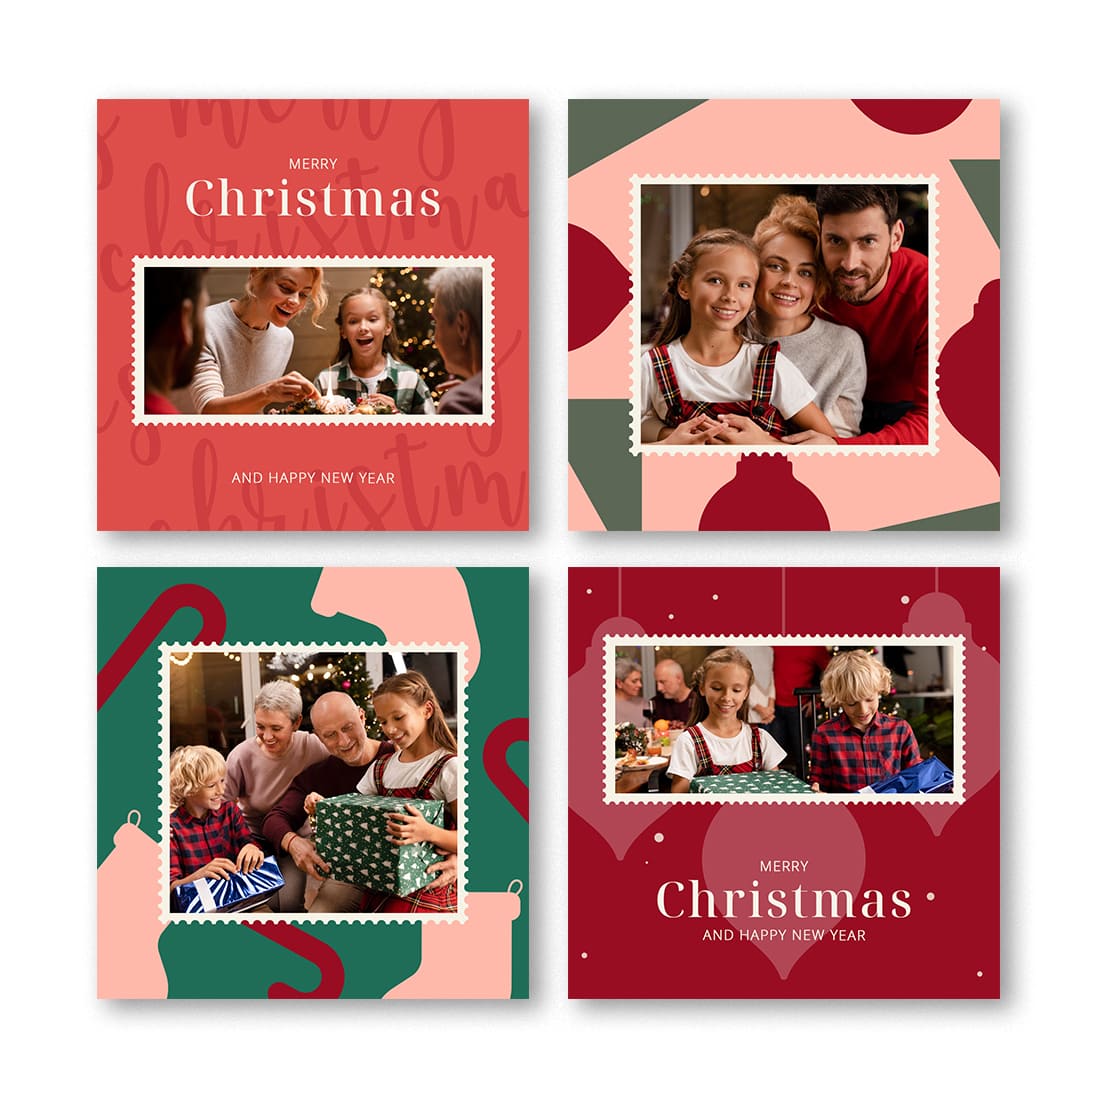 10 christmas post templates for instagram cover.